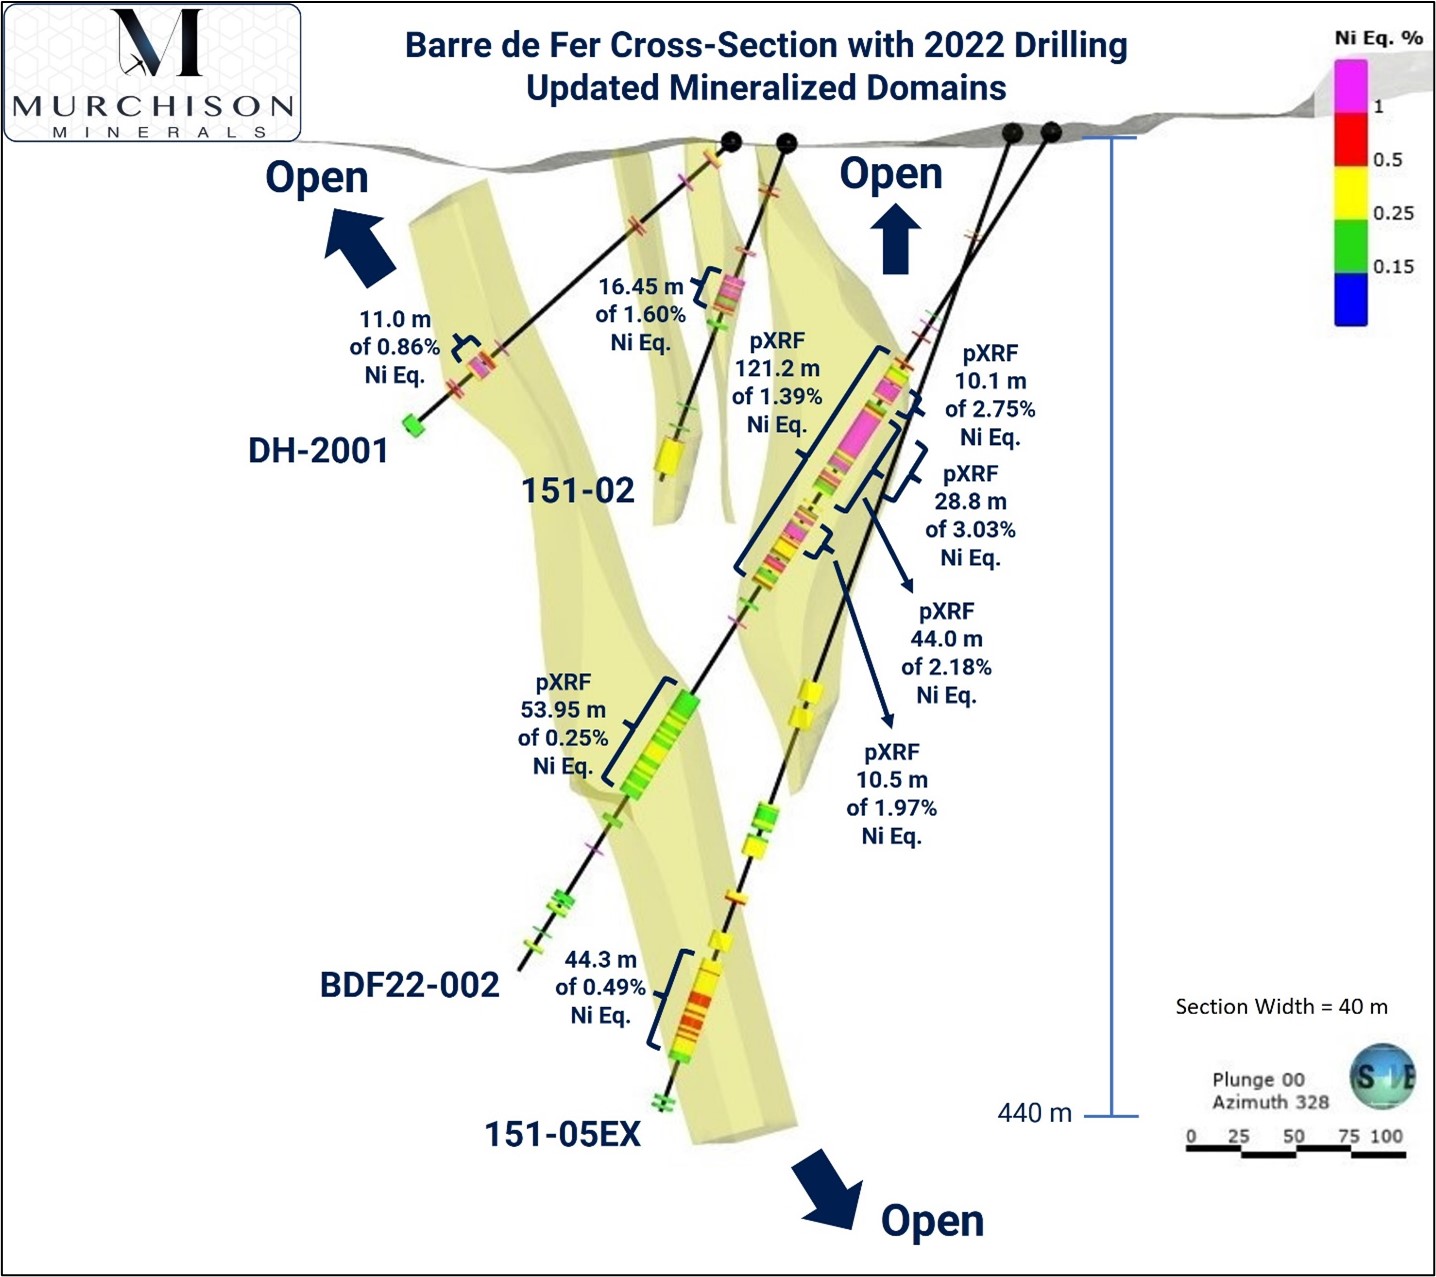 Murchison Minerals Fig 8 Updated 2022 BDF Cross Section